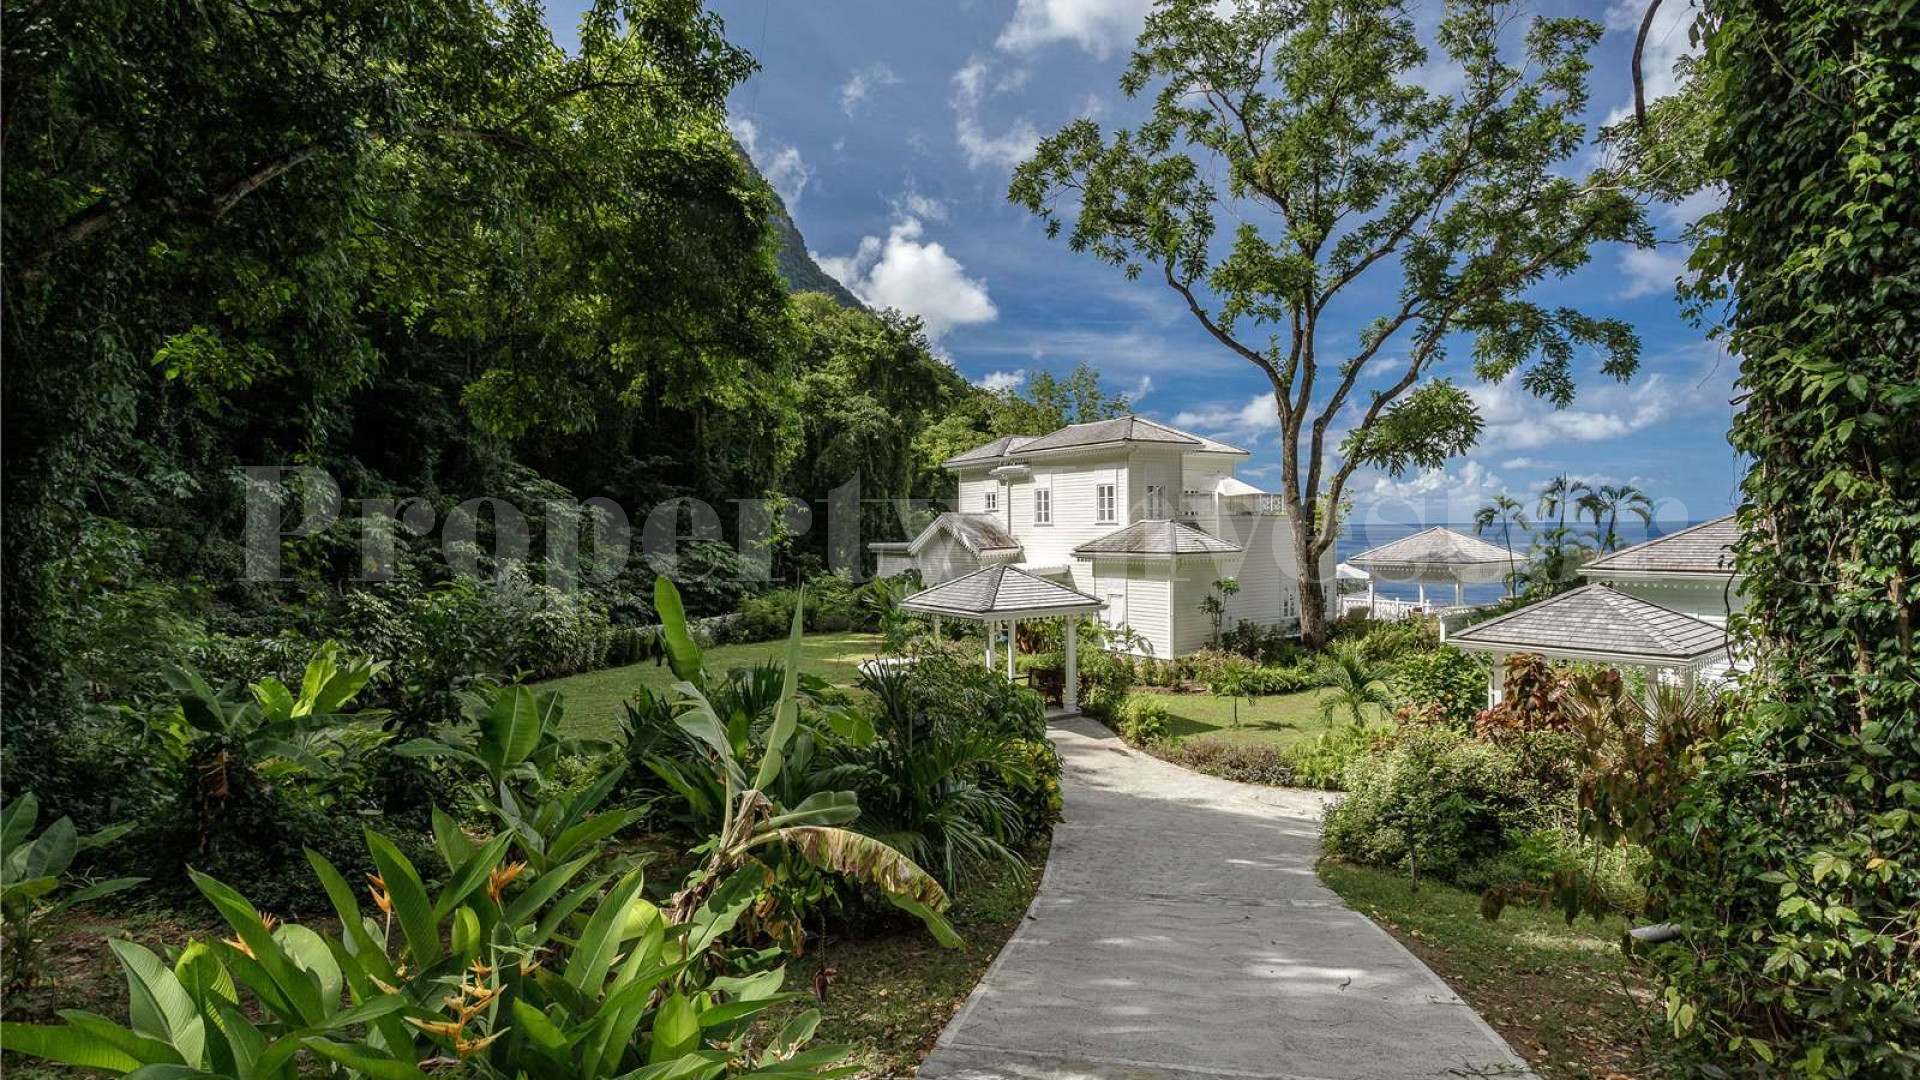 Exquisite 4 Bedroom Luxury Colonial Residence in St Lucia